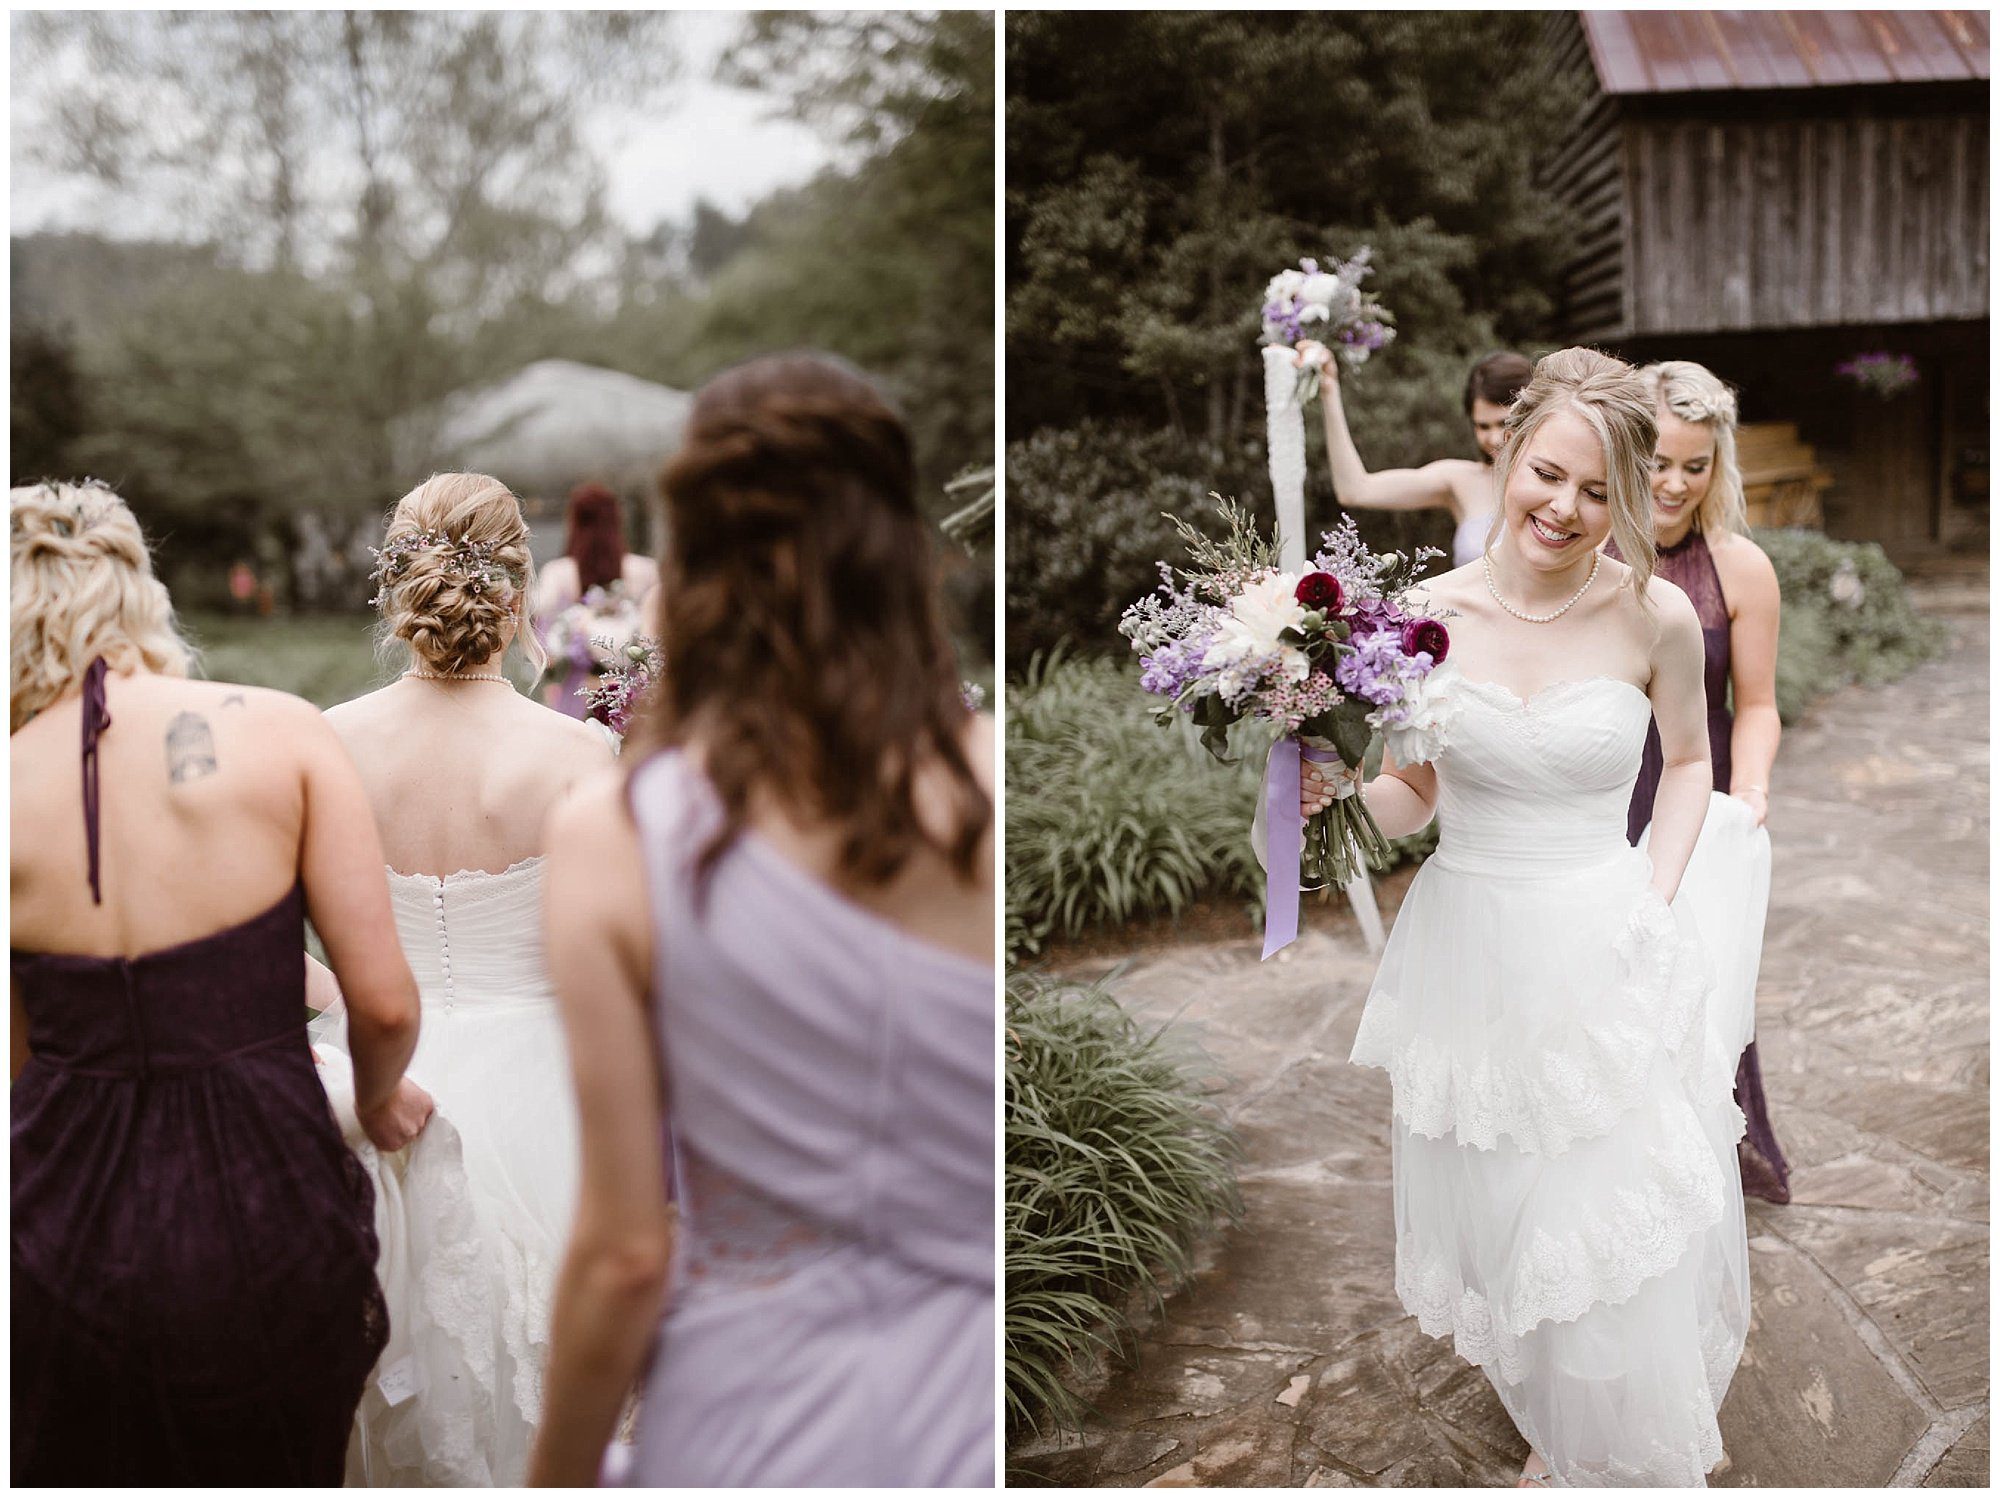 Bridesmaid and bride at The Lily Barn in Townsend, Tennessee